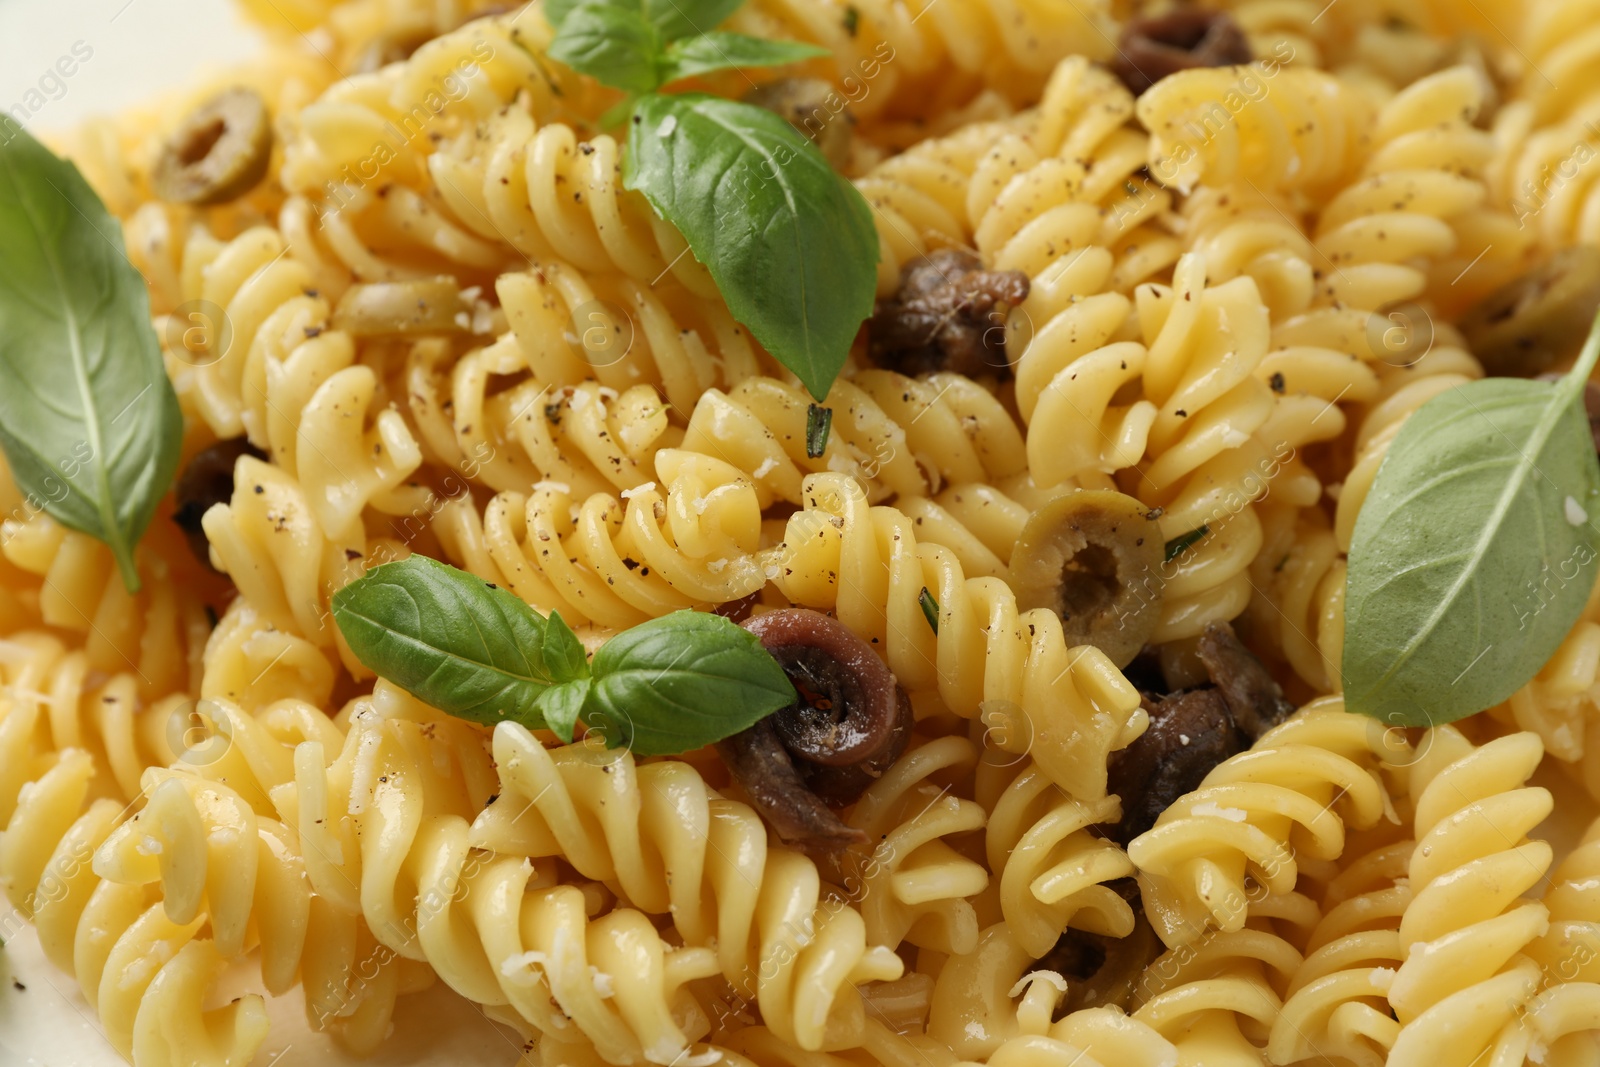 Photo of Delicious pasta with anchovies and basil as background, closeup